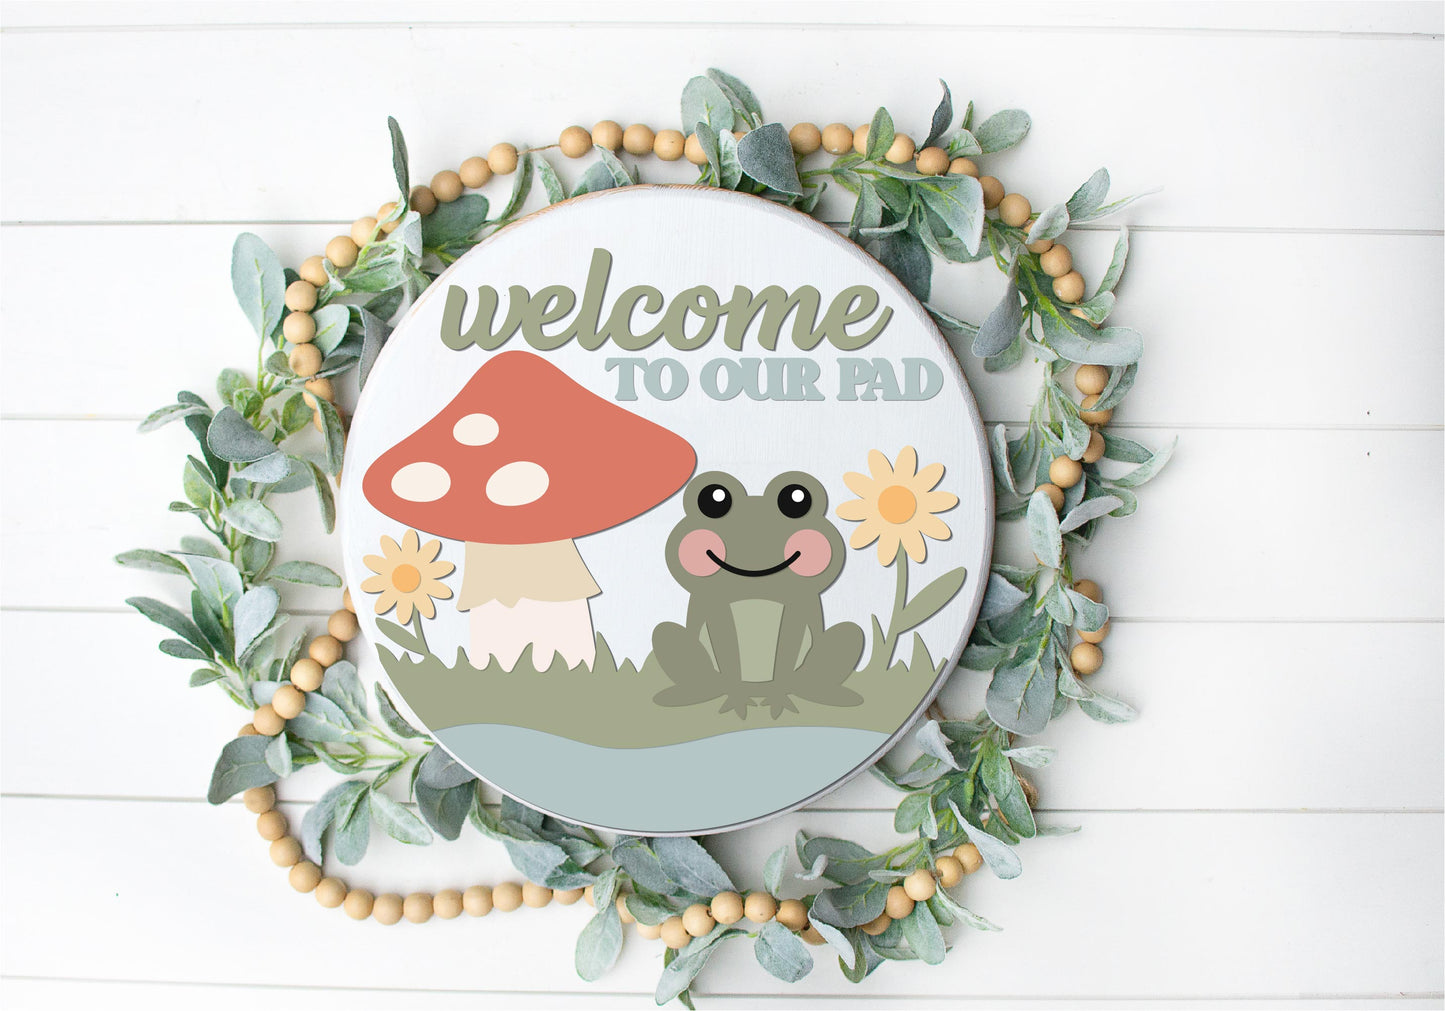 Welcome frog sign